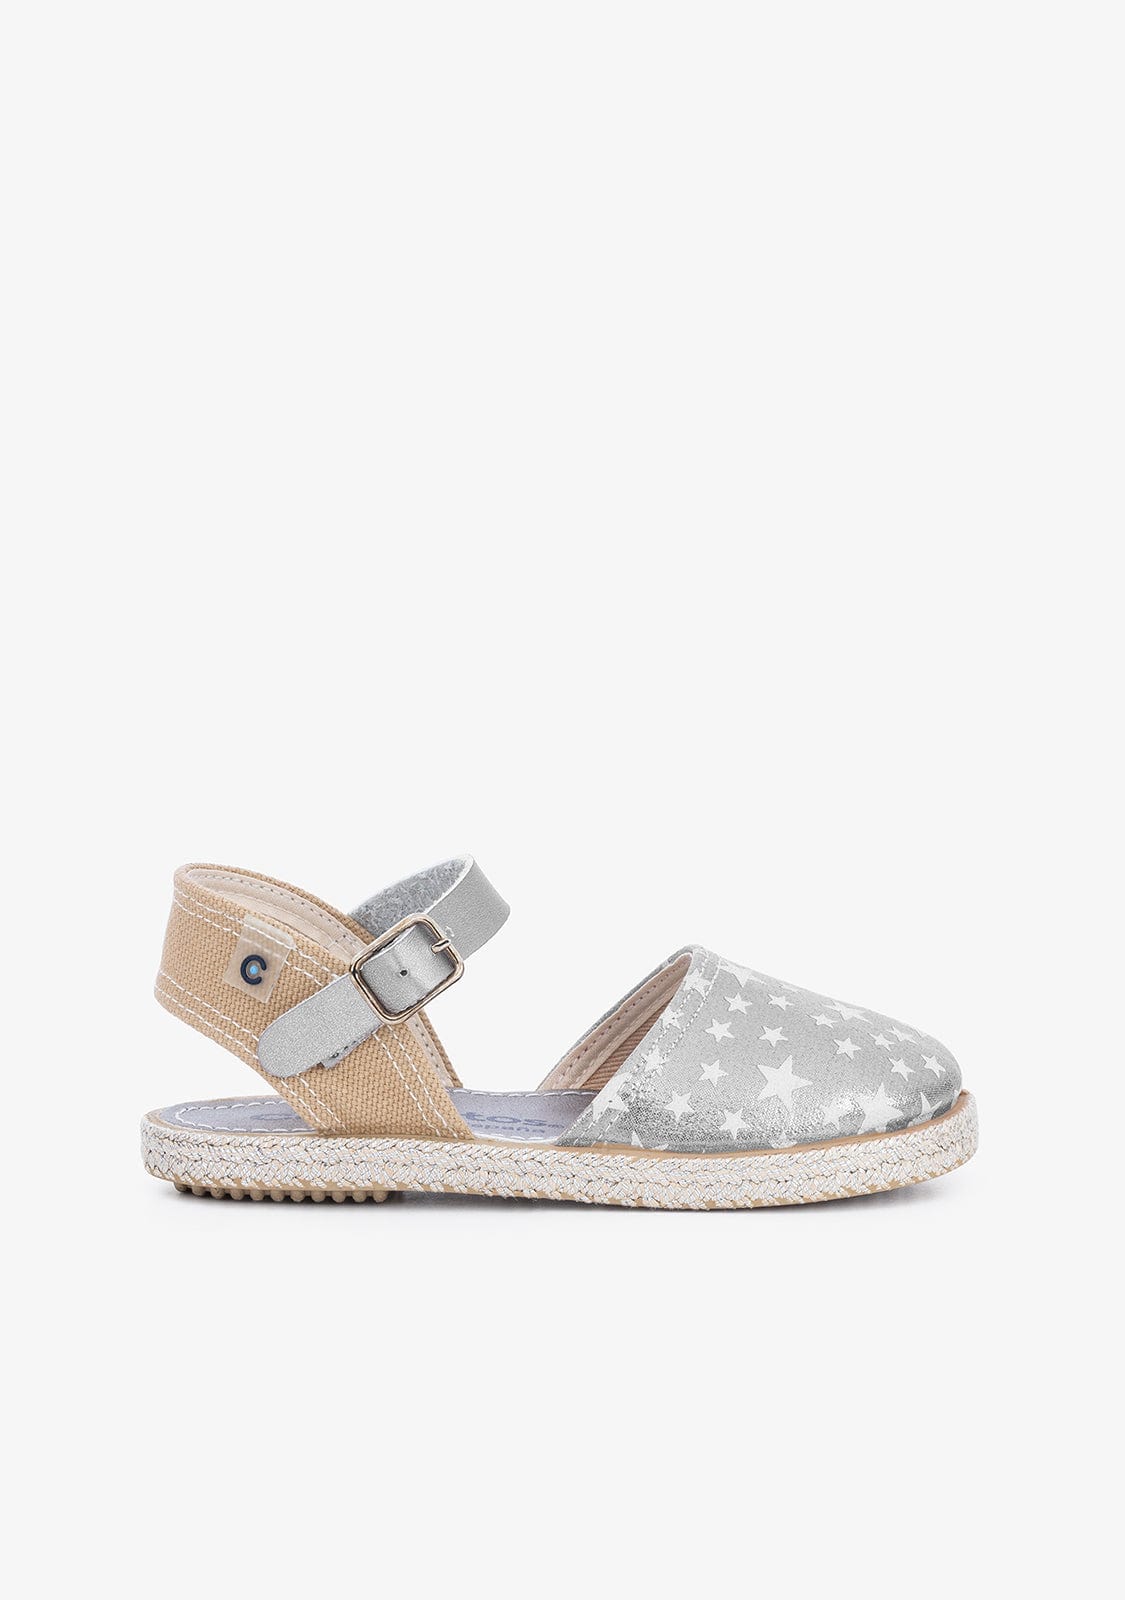 CONGUITOS Shoes Girl's Star Silver Glow Espadrilles